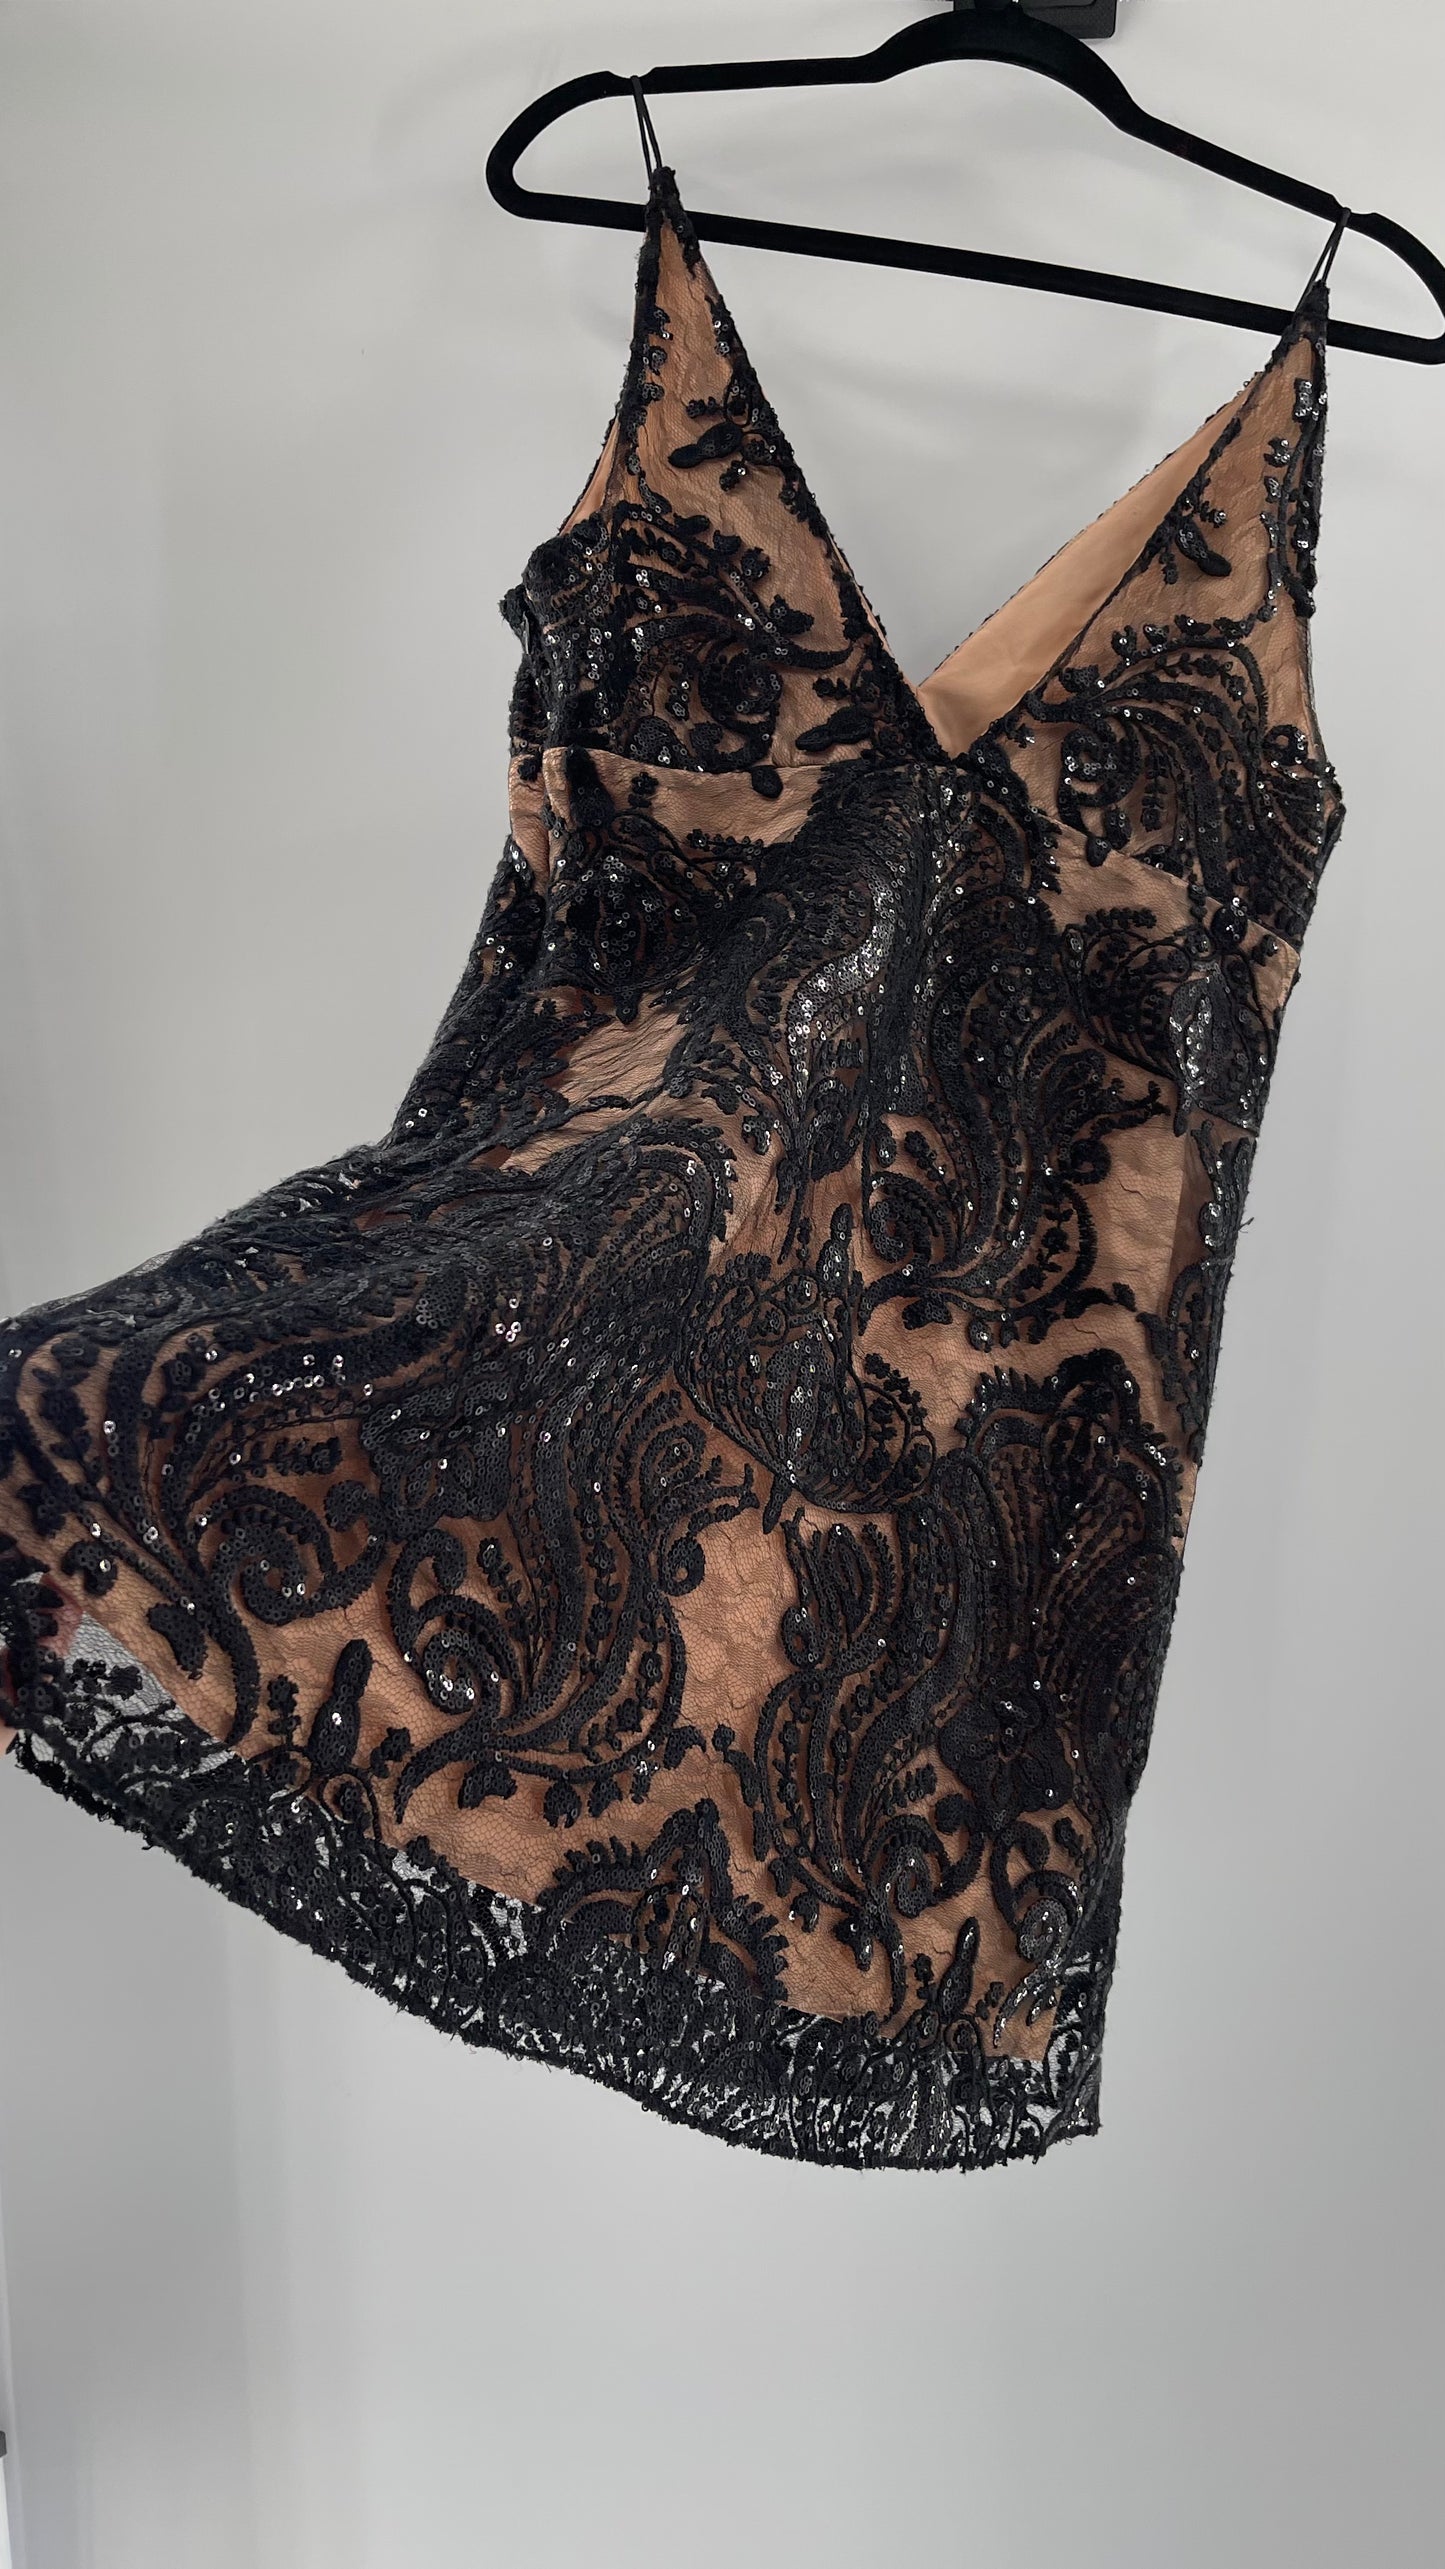 Free People Night Shimmers Nude Dress with Black Sequin Lace (8)